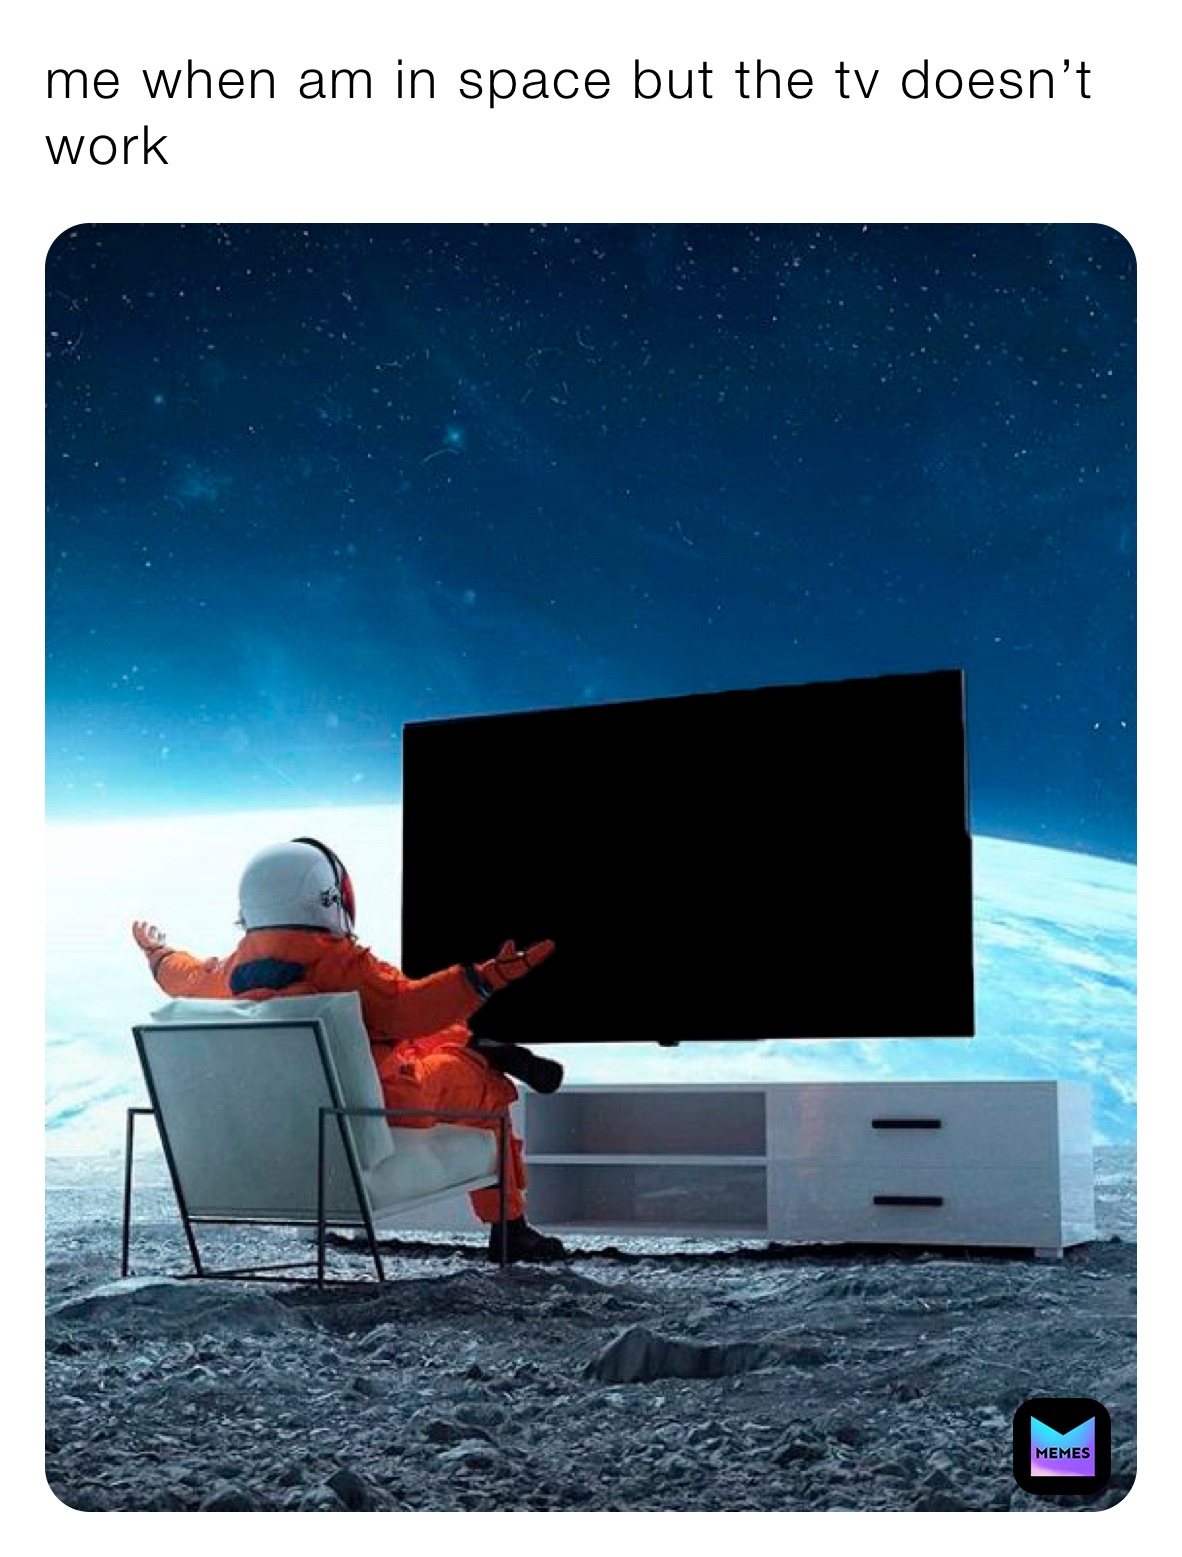 me when am in space but the tv doesn’t work